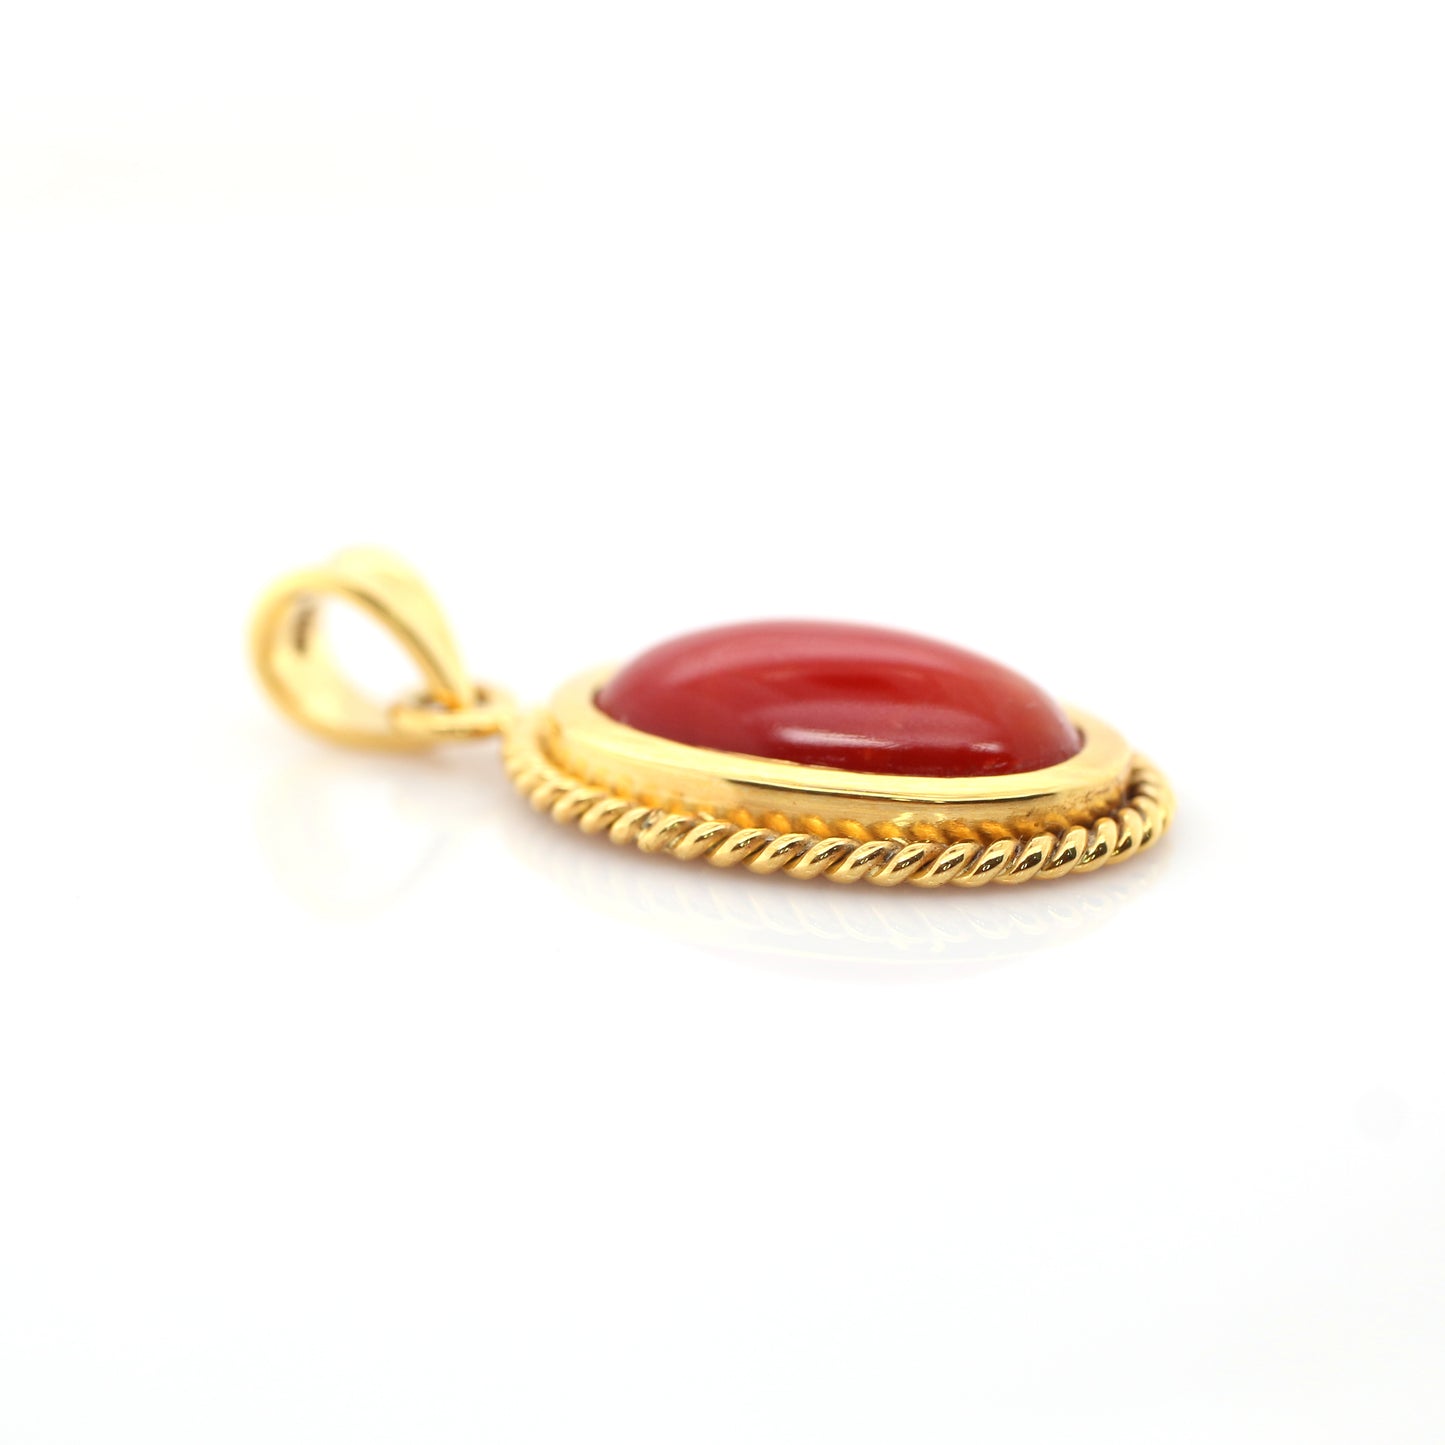 Natural Red Coral Pendant - 18 K Yellow  Gold 6.50 gm